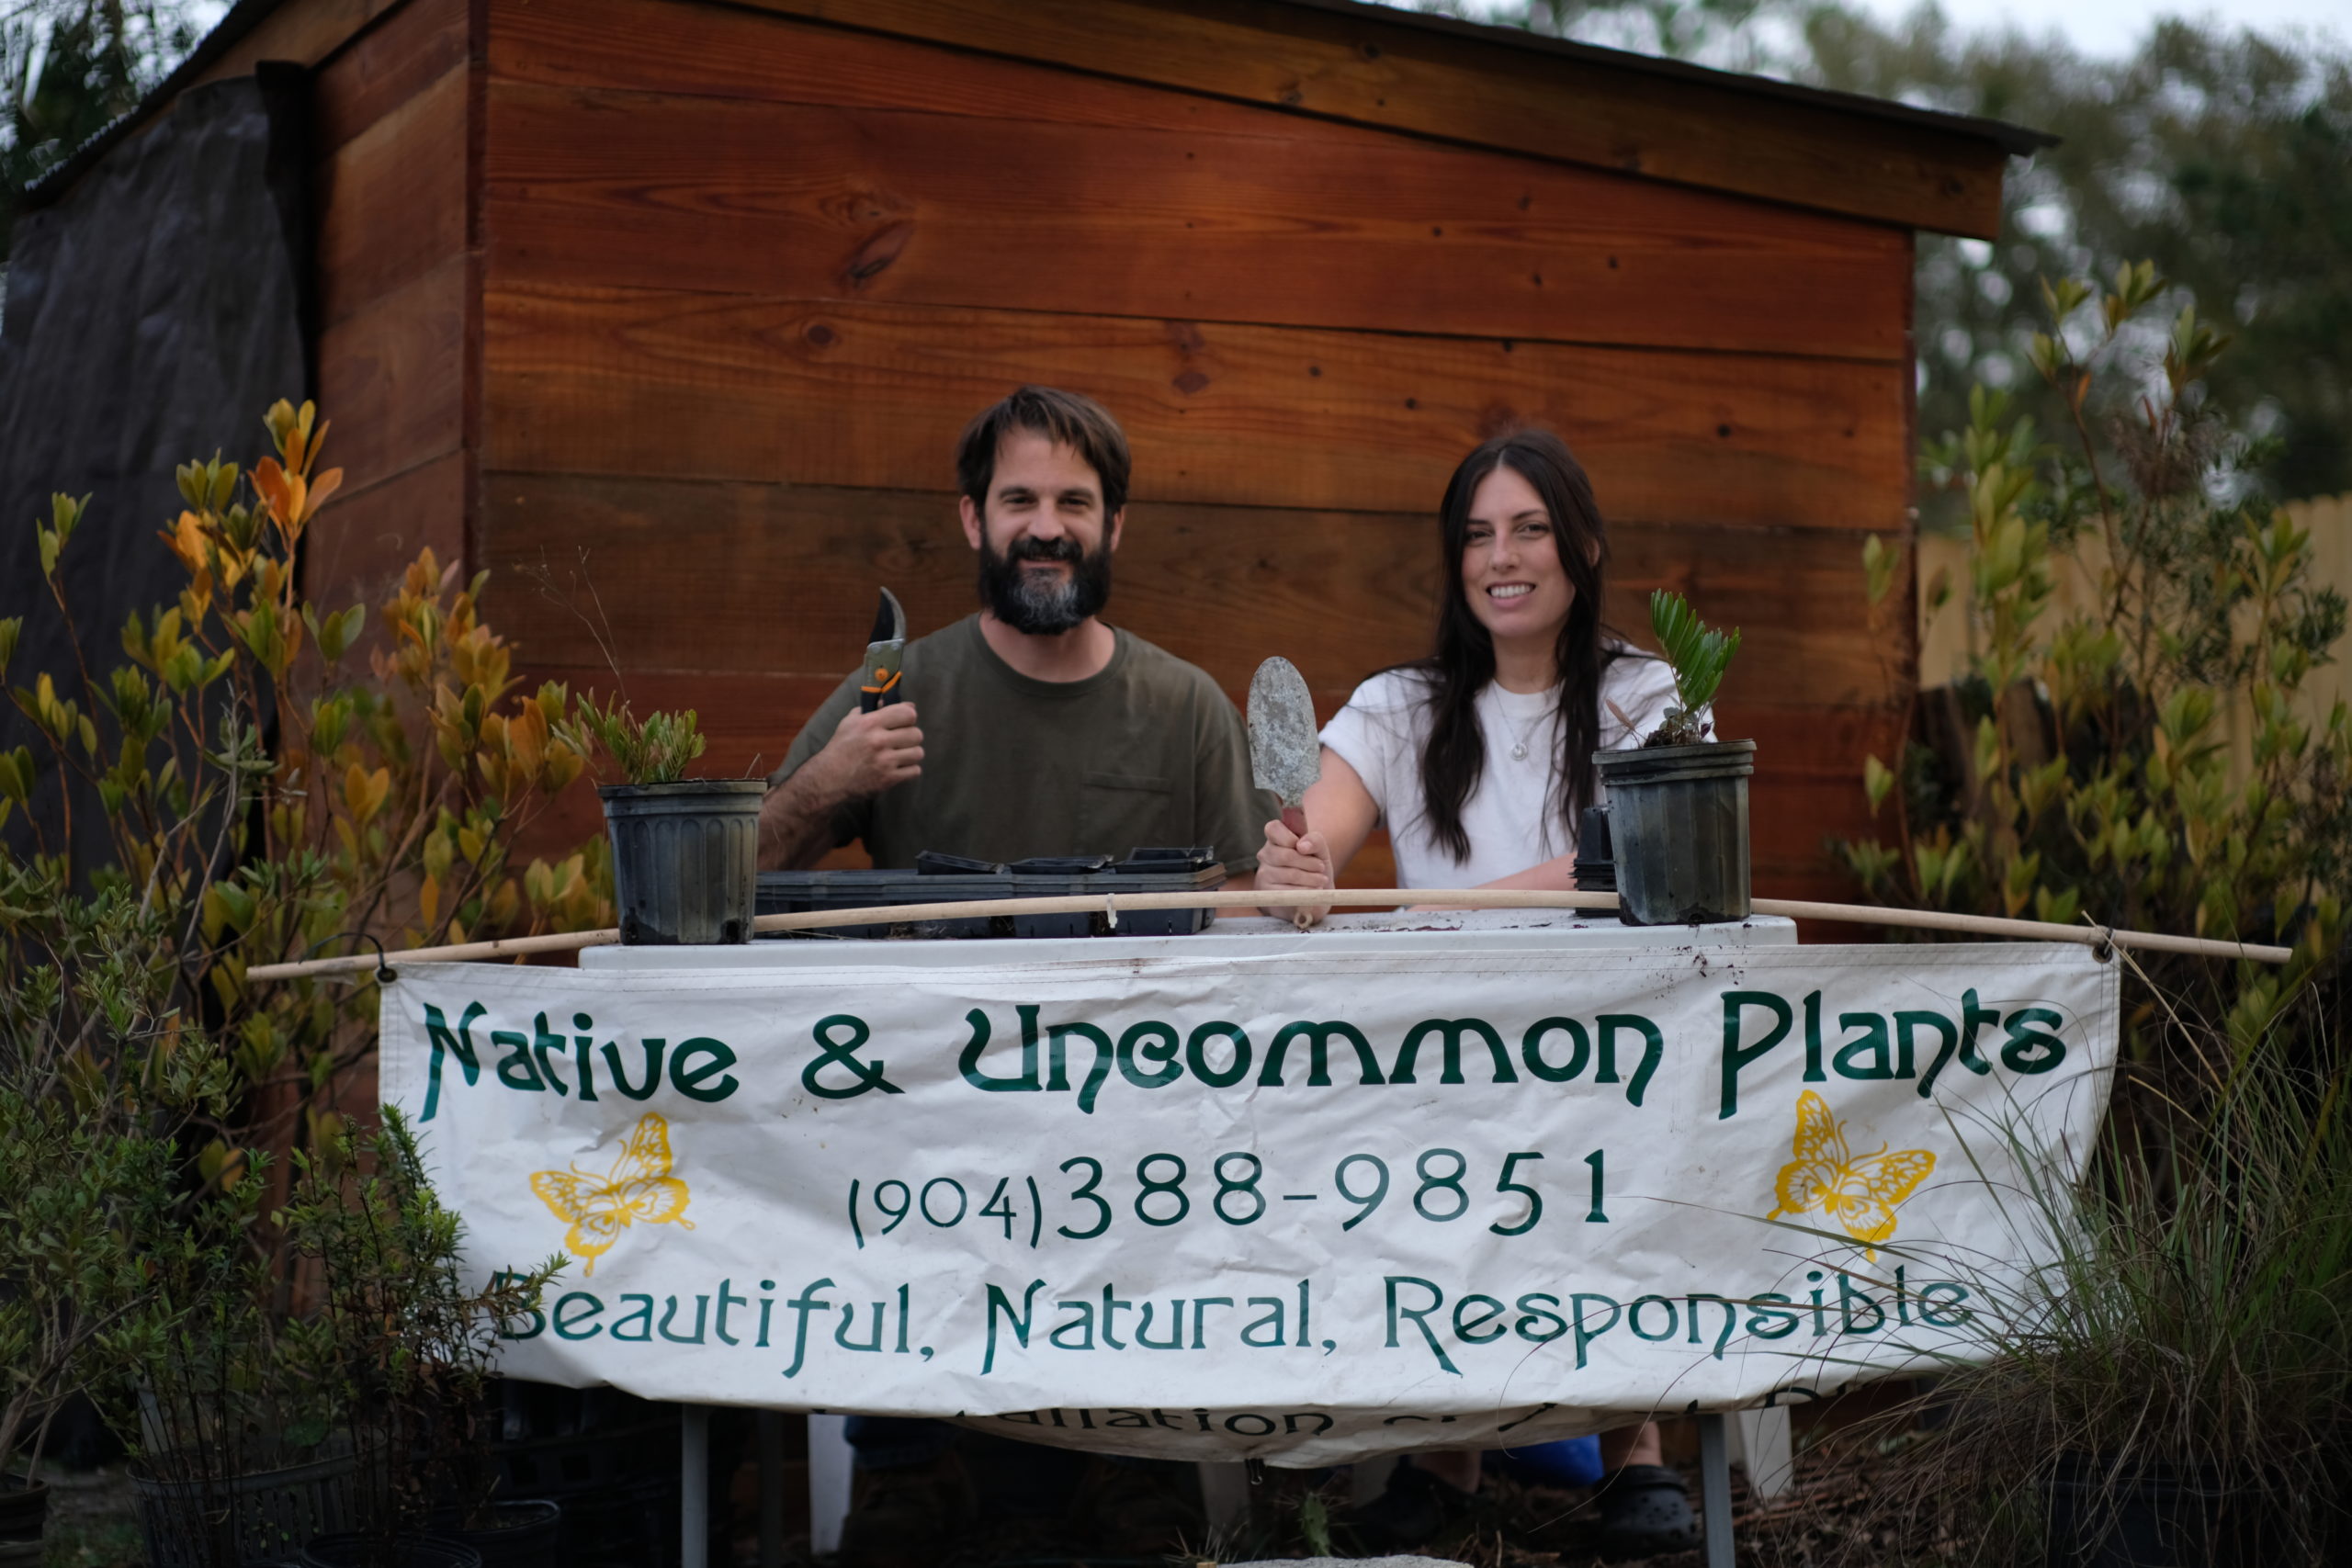 Alfred and Leslie sitting behind a table with a sign in the front that has Native & Uncommon Plants with the phone number and 3 adjectives. Leslie is wearing white sitting on the right while Afred is wearing dark green sitting on the left. Both are smiling proudly holding up gardening tools